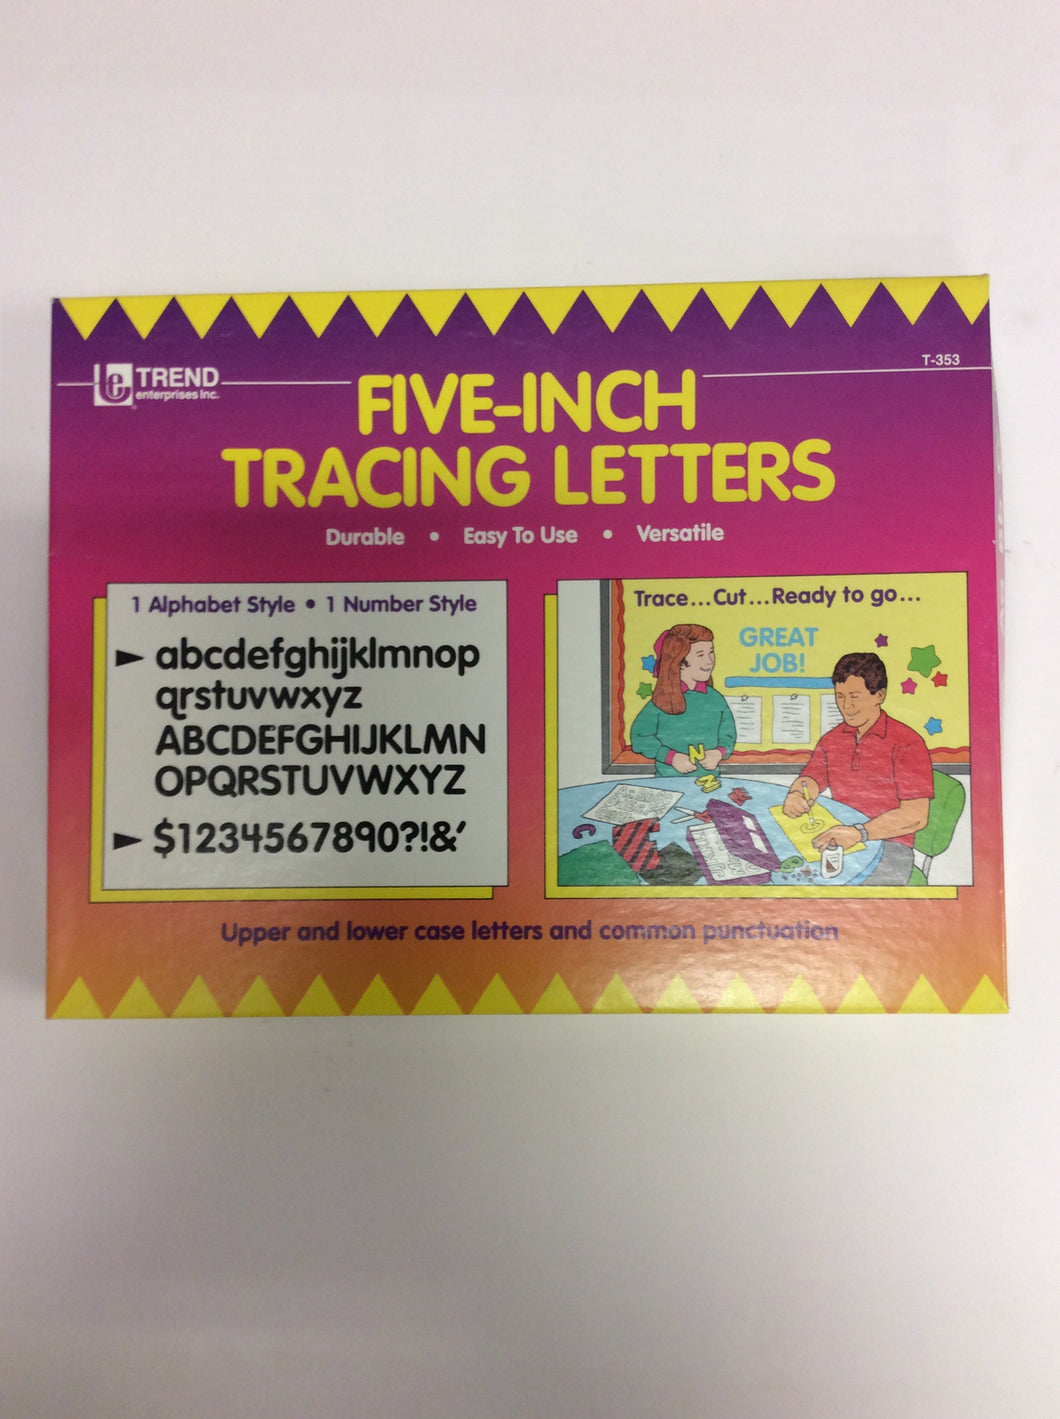 5” tracing letters